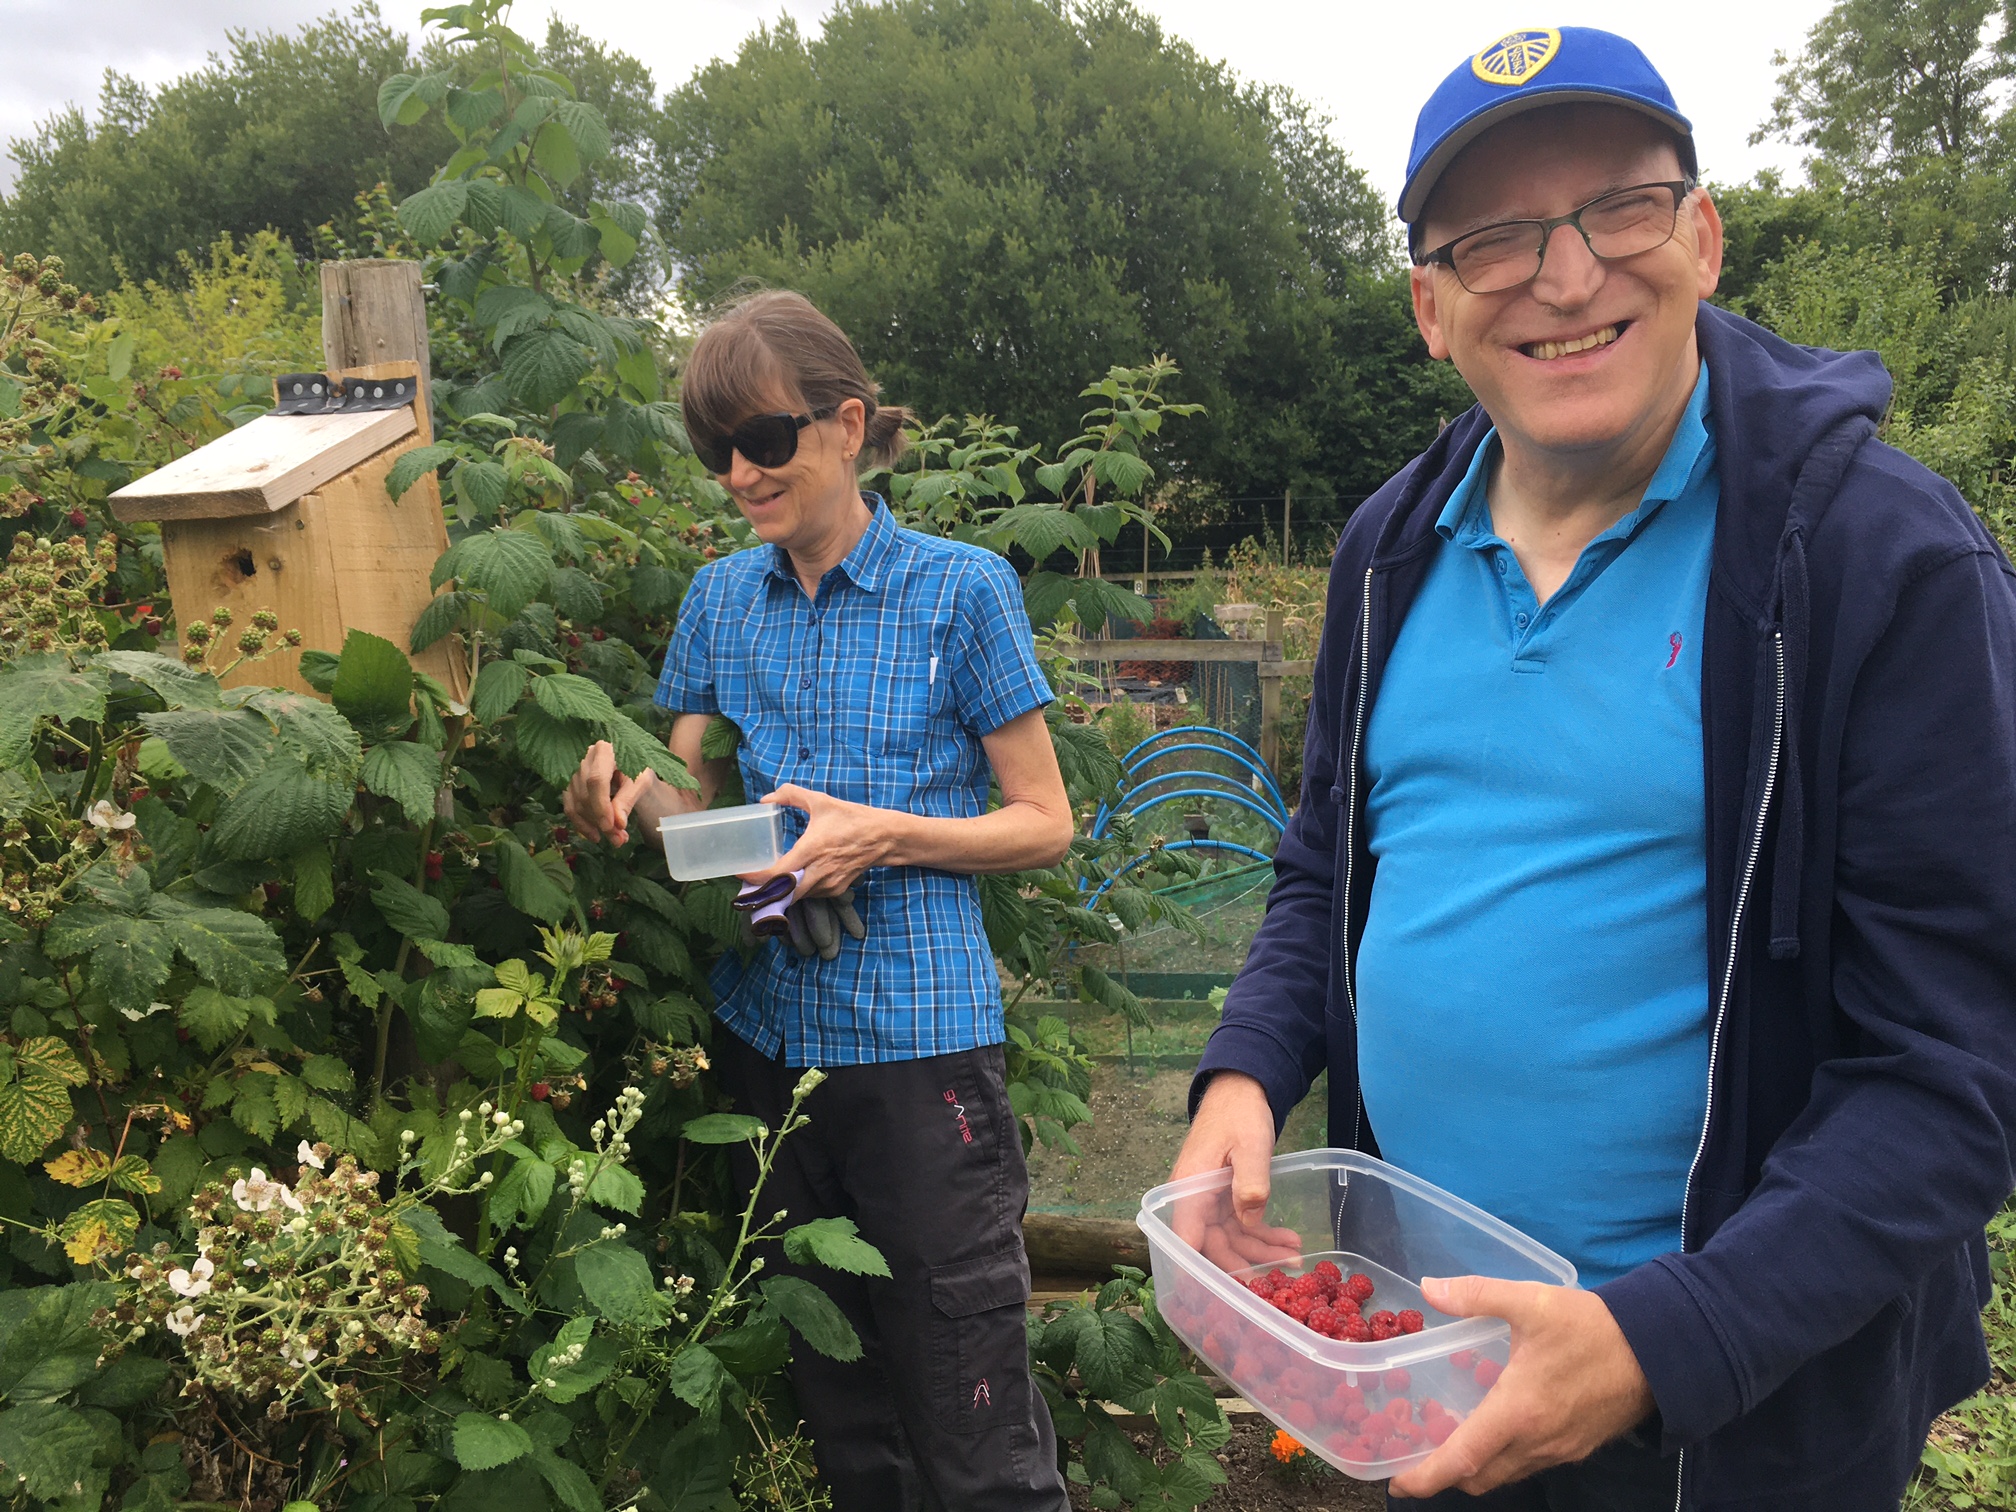 A man and a woman picking fruit down an allotment